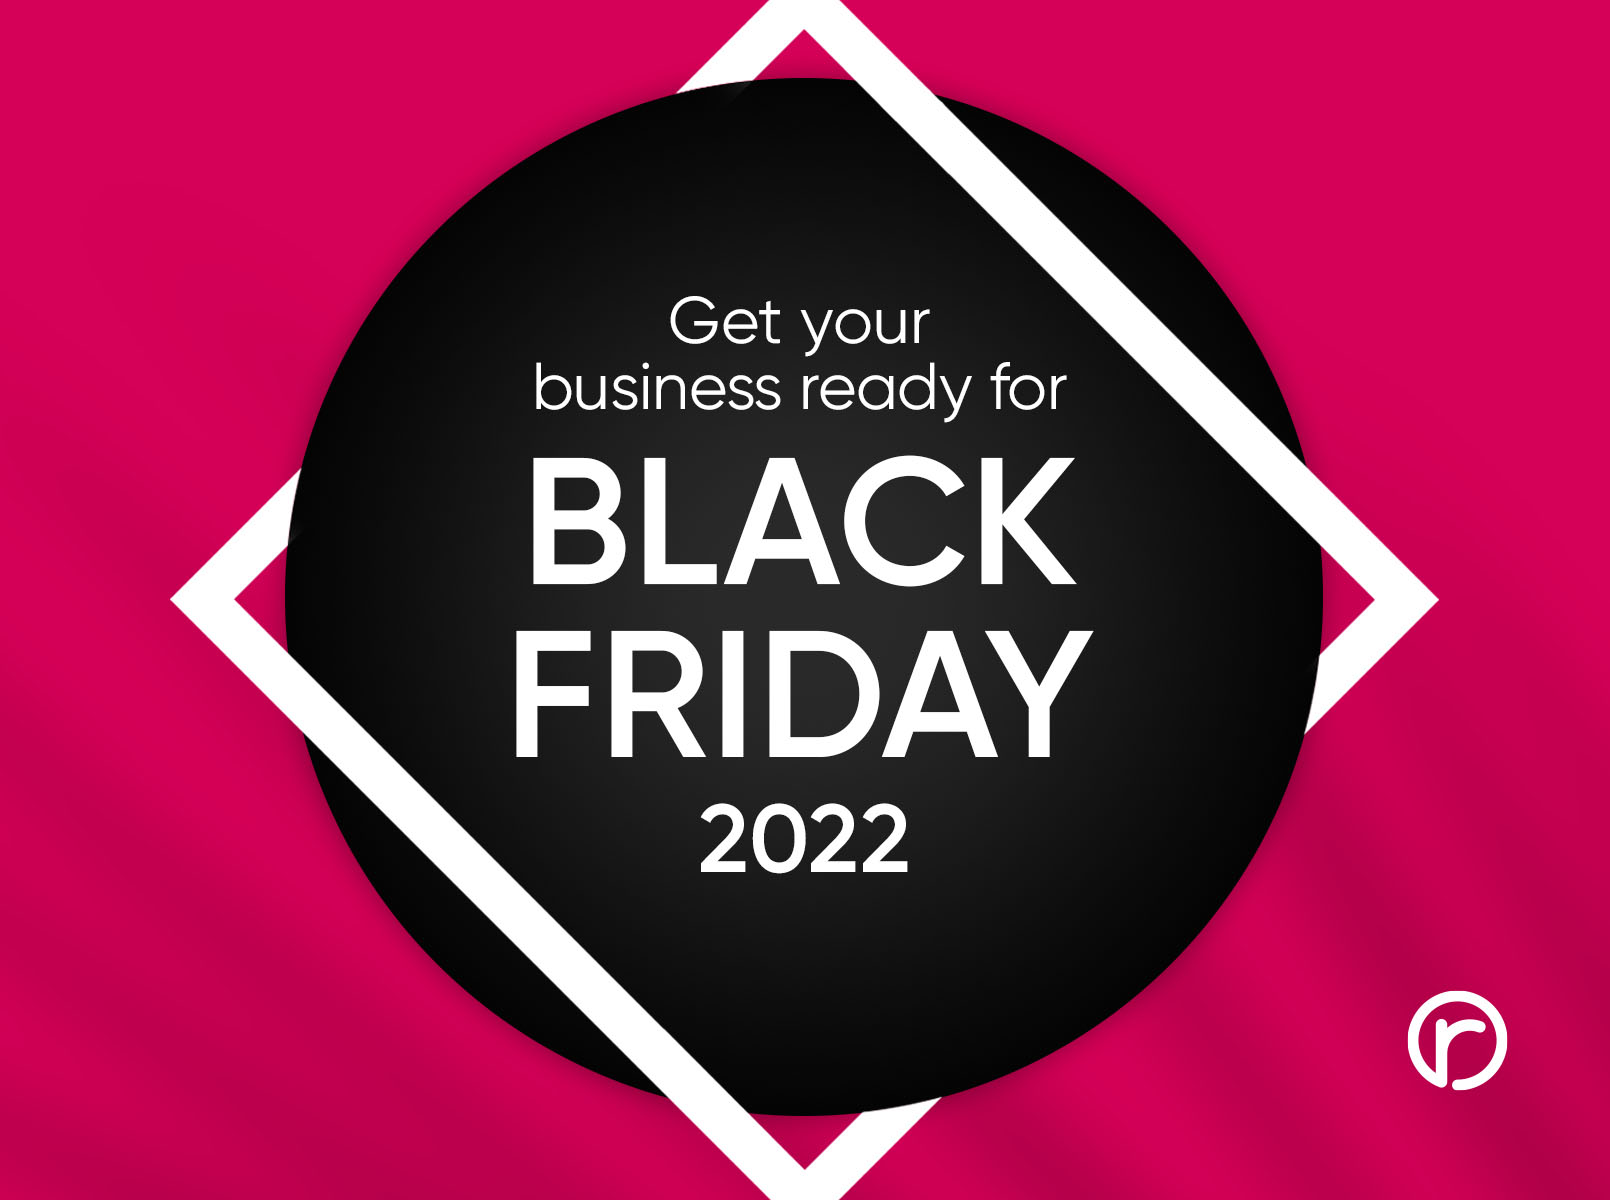 Get your business ready for Black Friday 2022